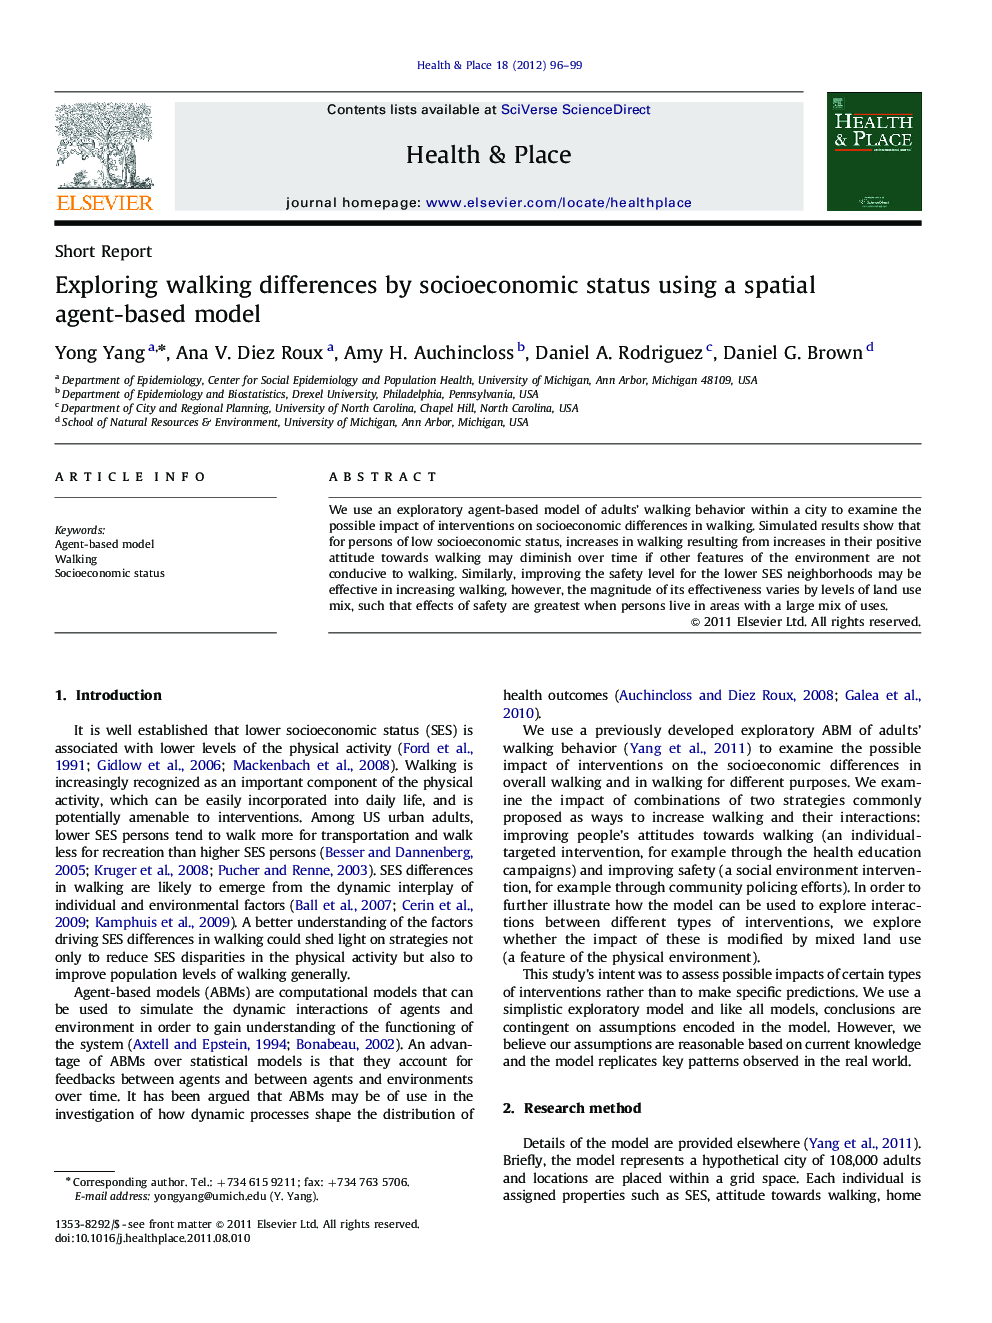 Exploring walking differences by socioeconomic status using a spatial agent-based model